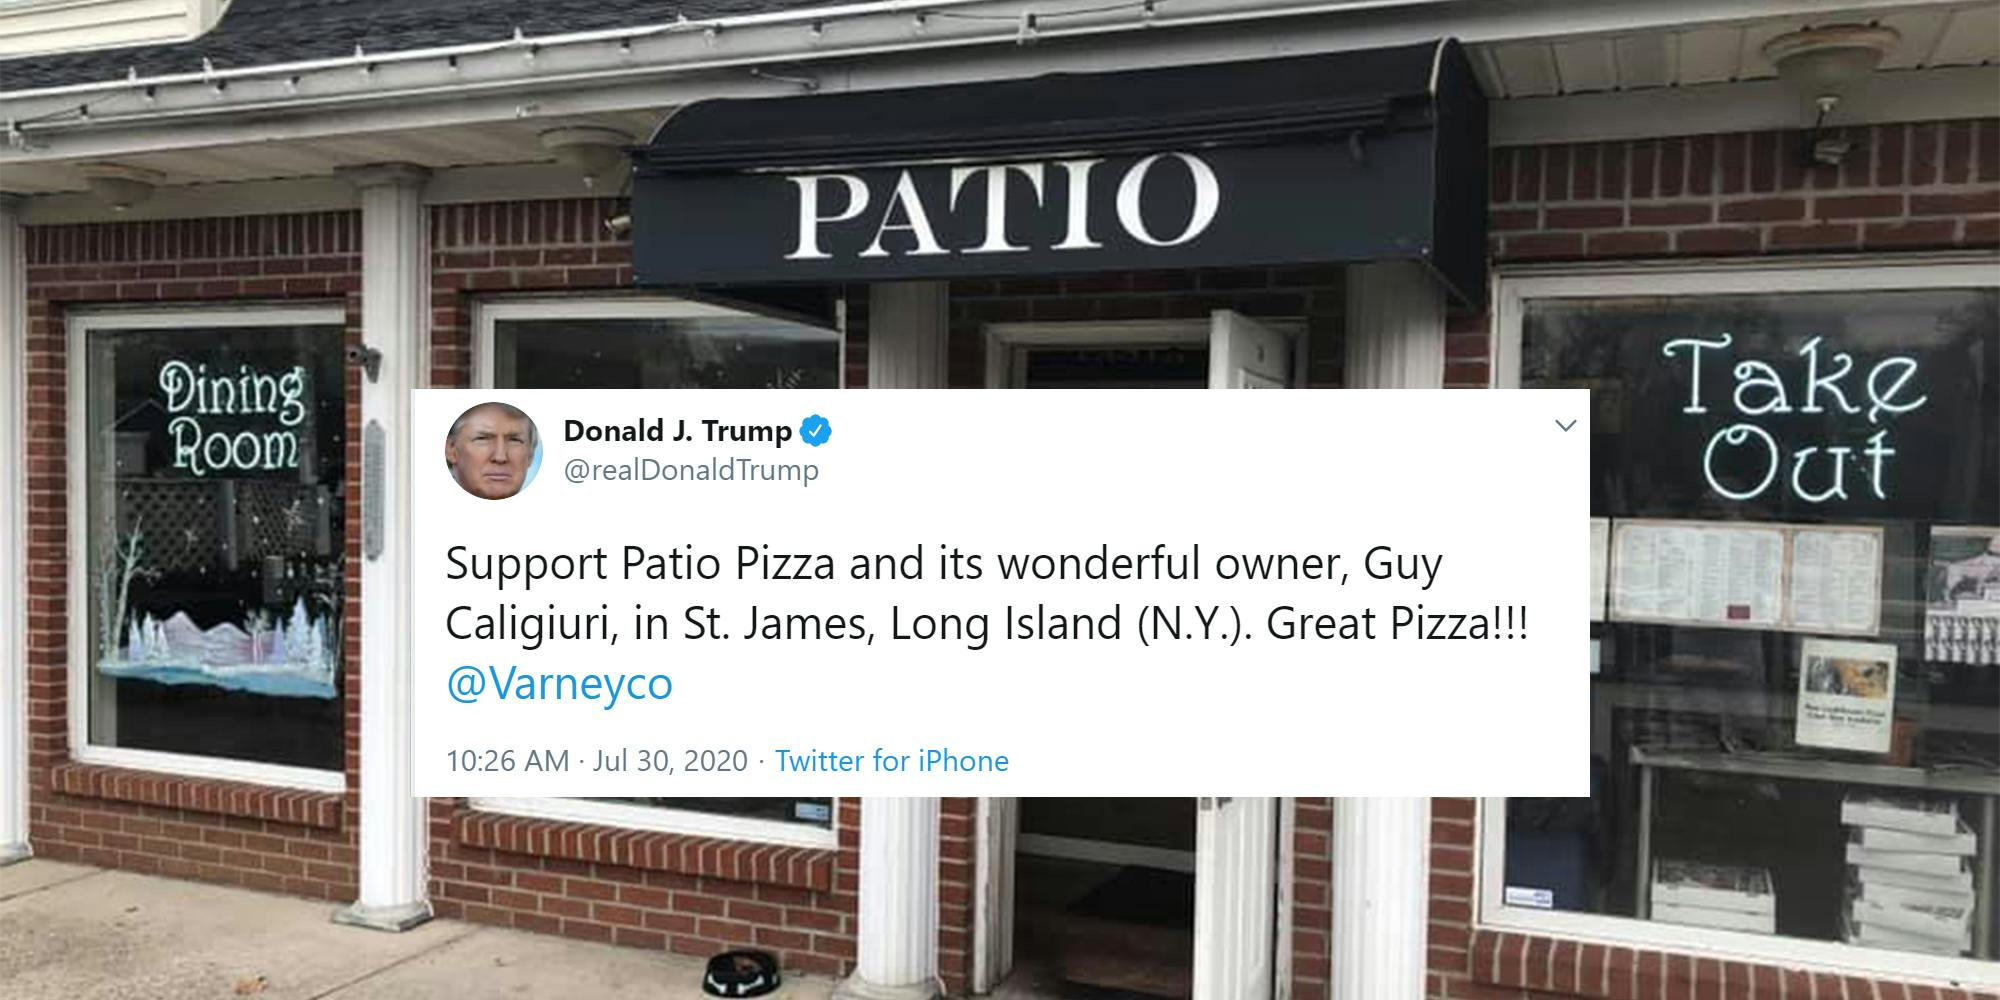 "Support Patio Pizza and its wonderful owner, Guy Caligiuri, in St. James, Long Island (N.Y.). Great Pizza!!! @Varneyco" tweet over Patio Pizza storefront